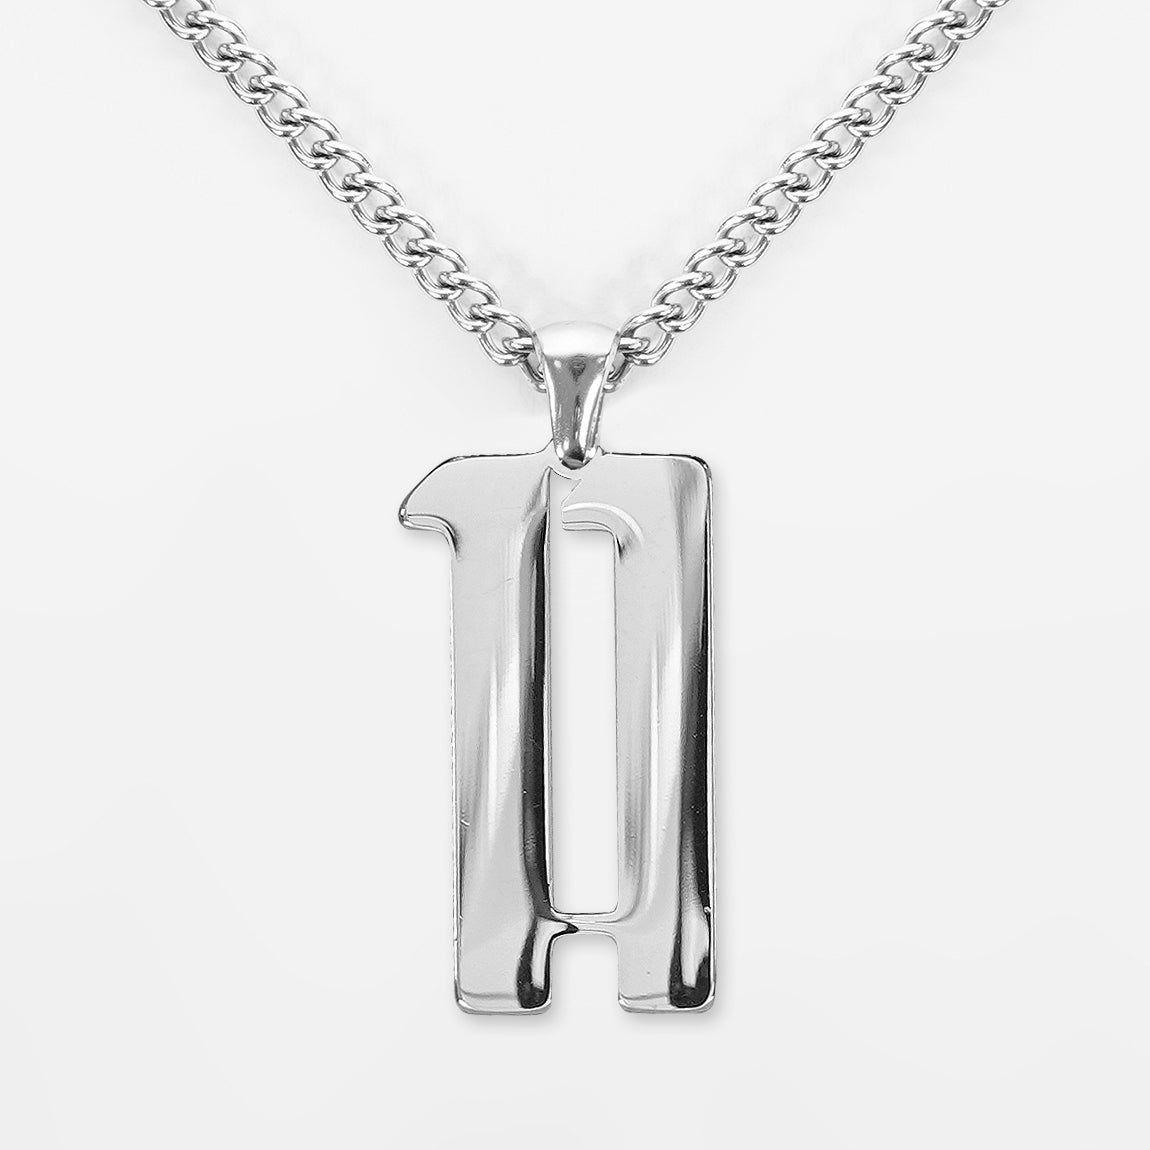 11 Number Pendant with Chain Necklace - Stainless Steel